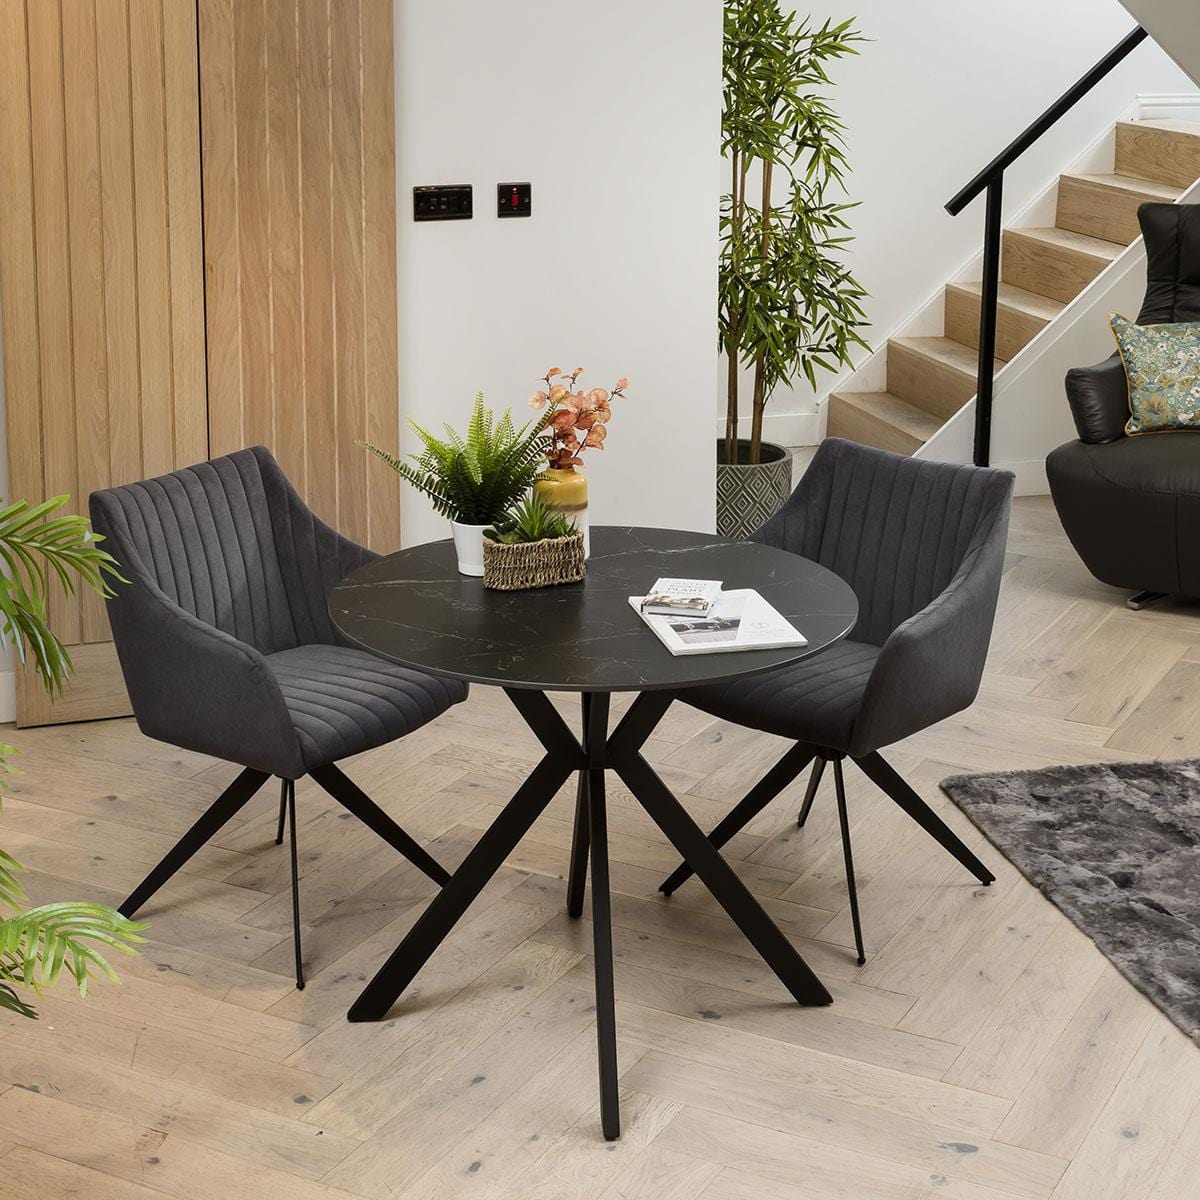 Quatropi Quatropi 2 Person Round Dining Table And Chairs - Black Ceramic Marble - Grey Chairs